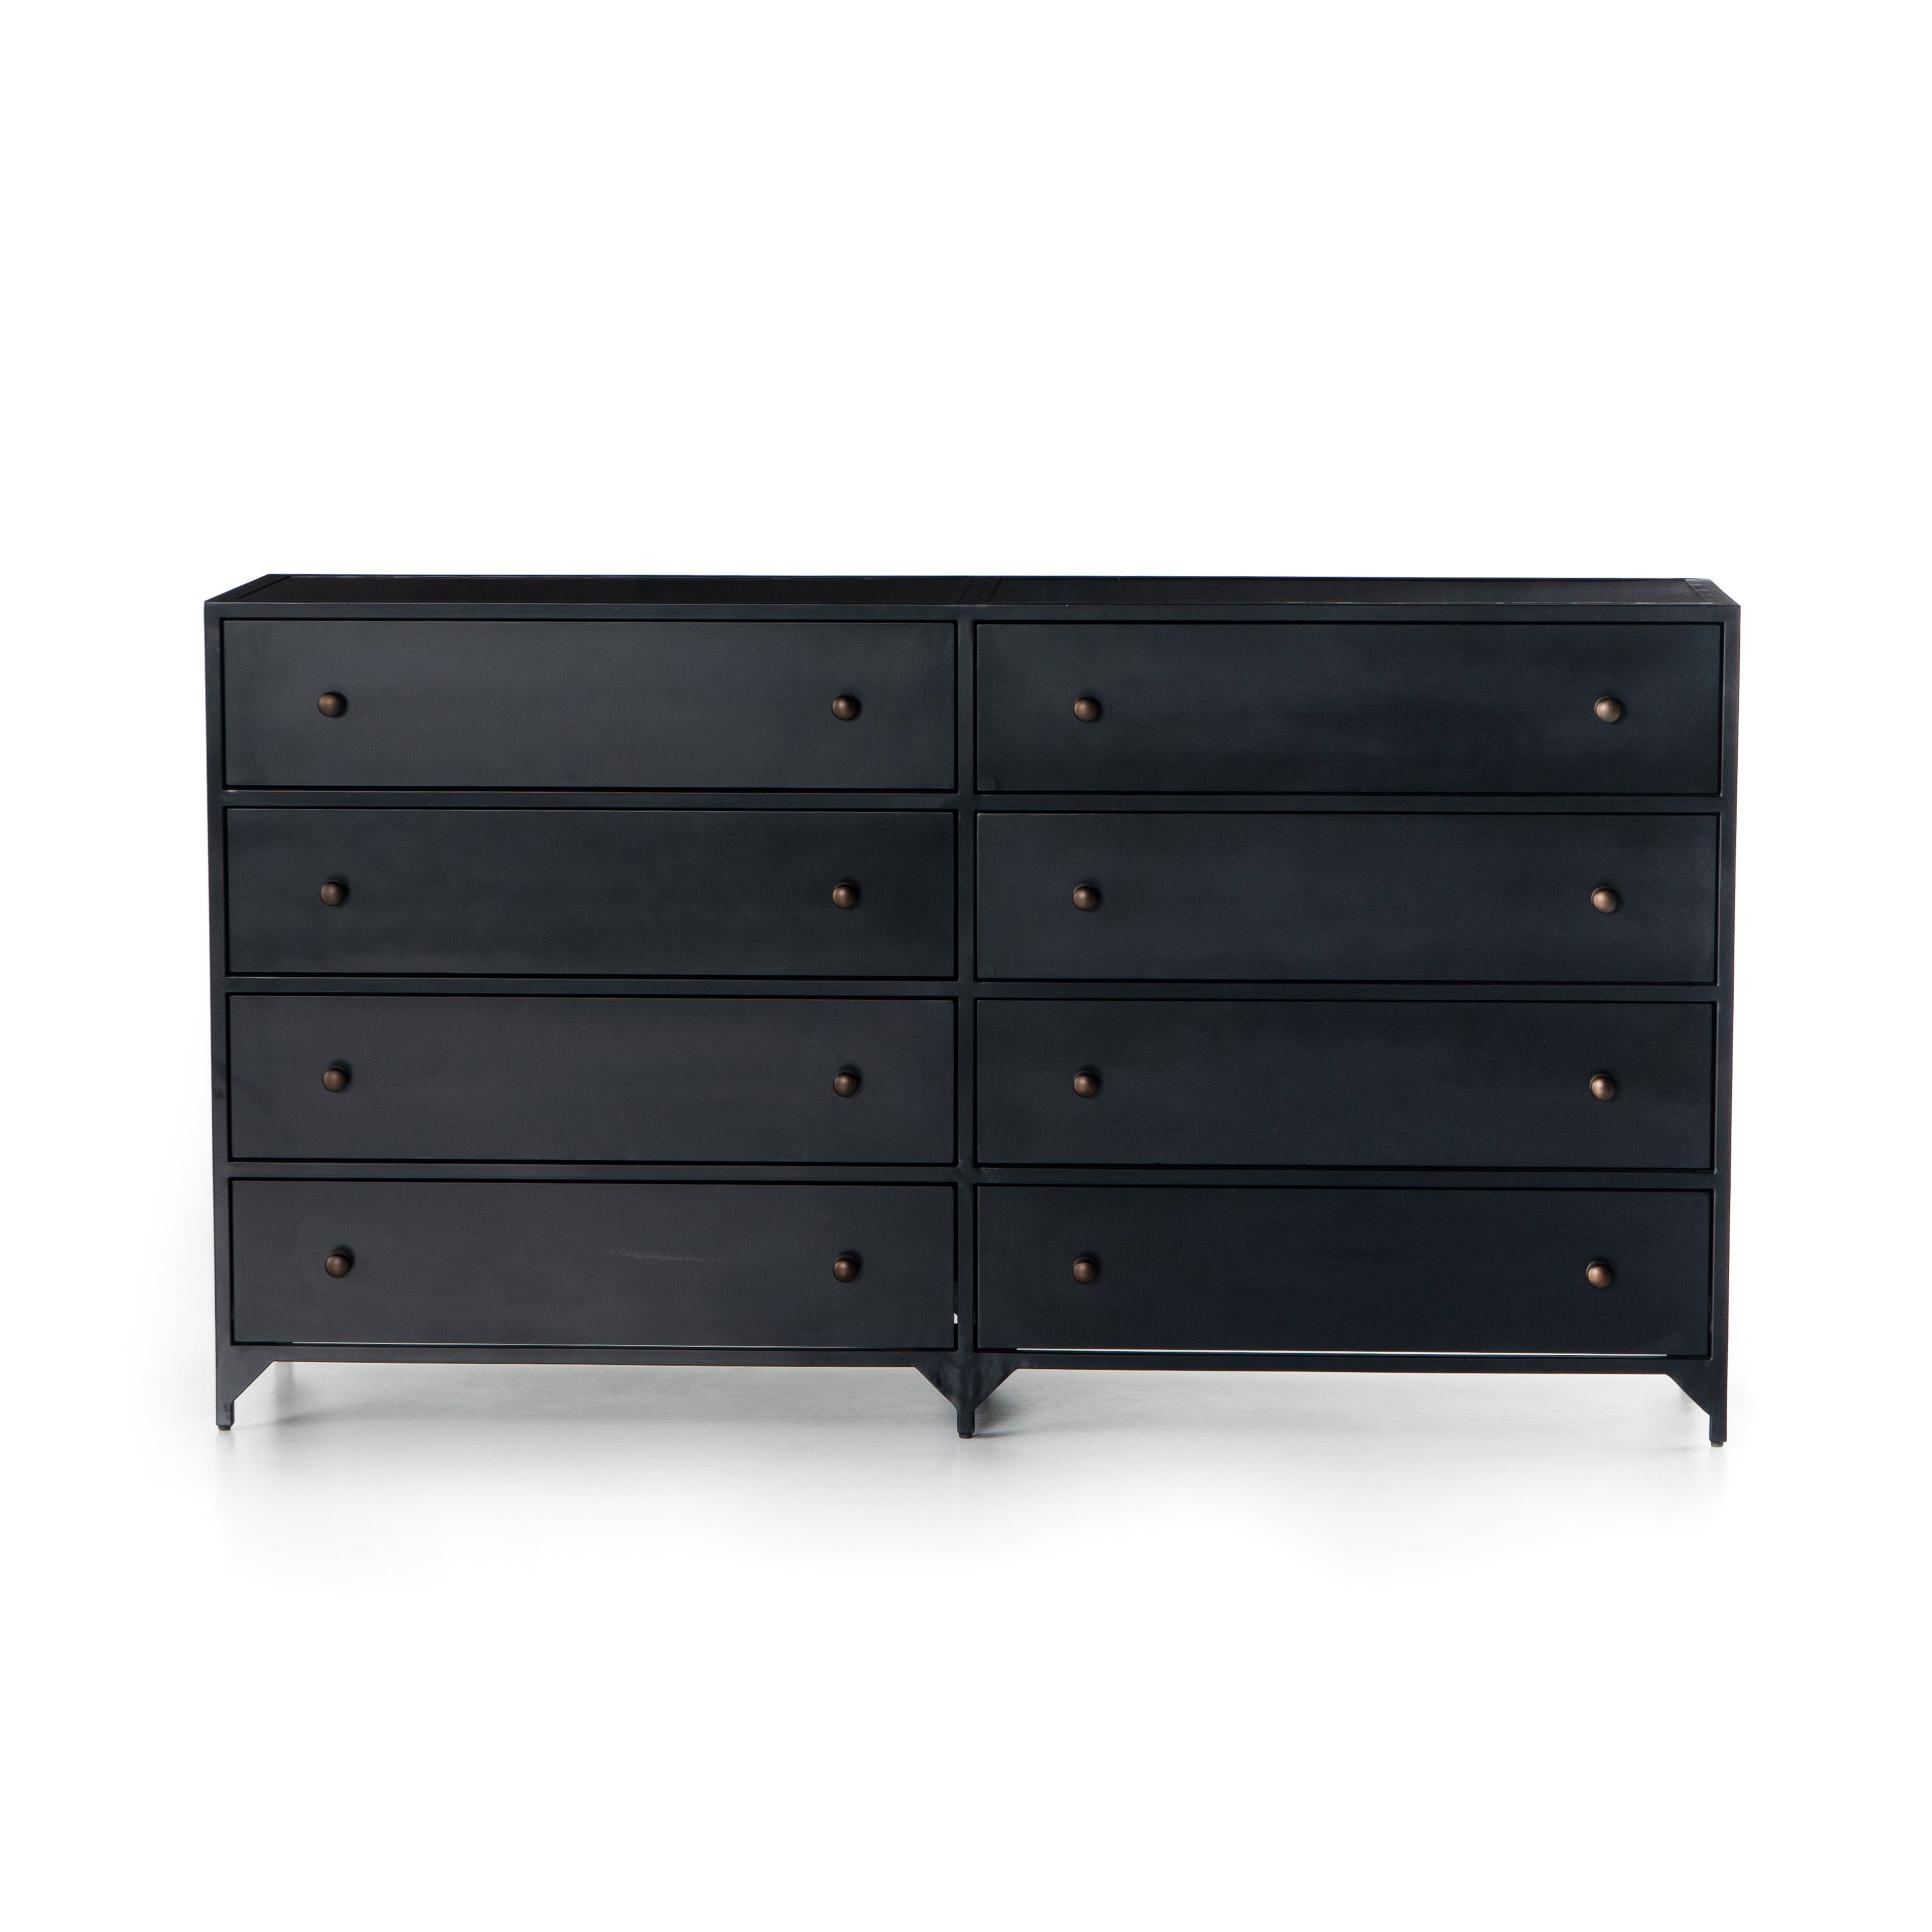 The brass knobs on this Belmont Black 8 Drawer Metal Dress give it a classy, antique look while also being the perfect vessel to store your clothes  Size: 70"w x 18.5"d x 38.5"h Colors: Black Materials: Iron